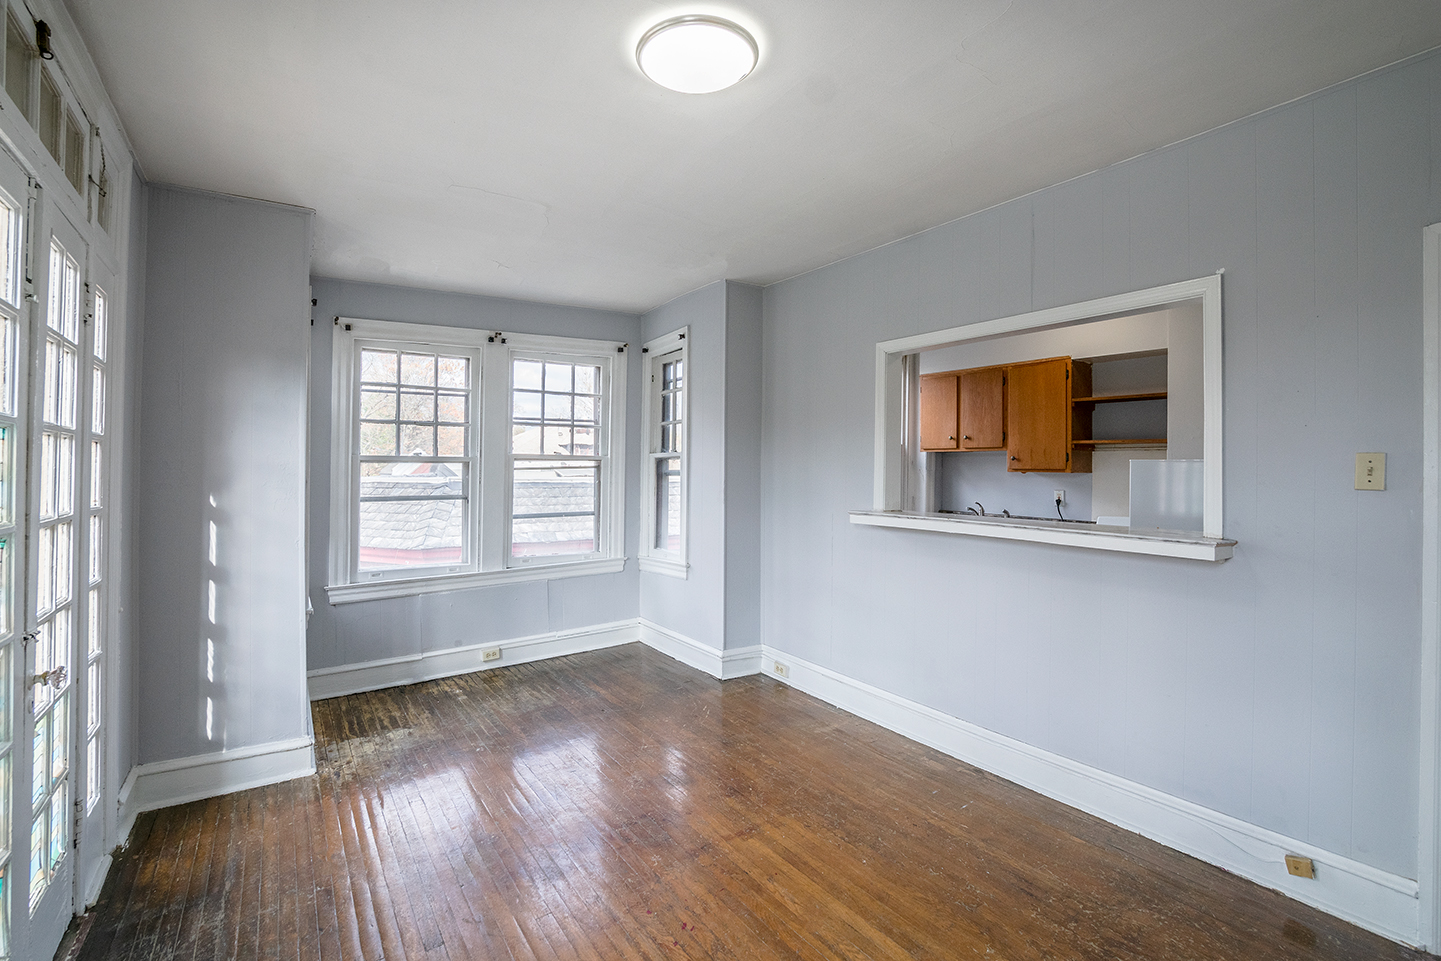 Property Photo For 2115 N. 63rd St, Unit 3A